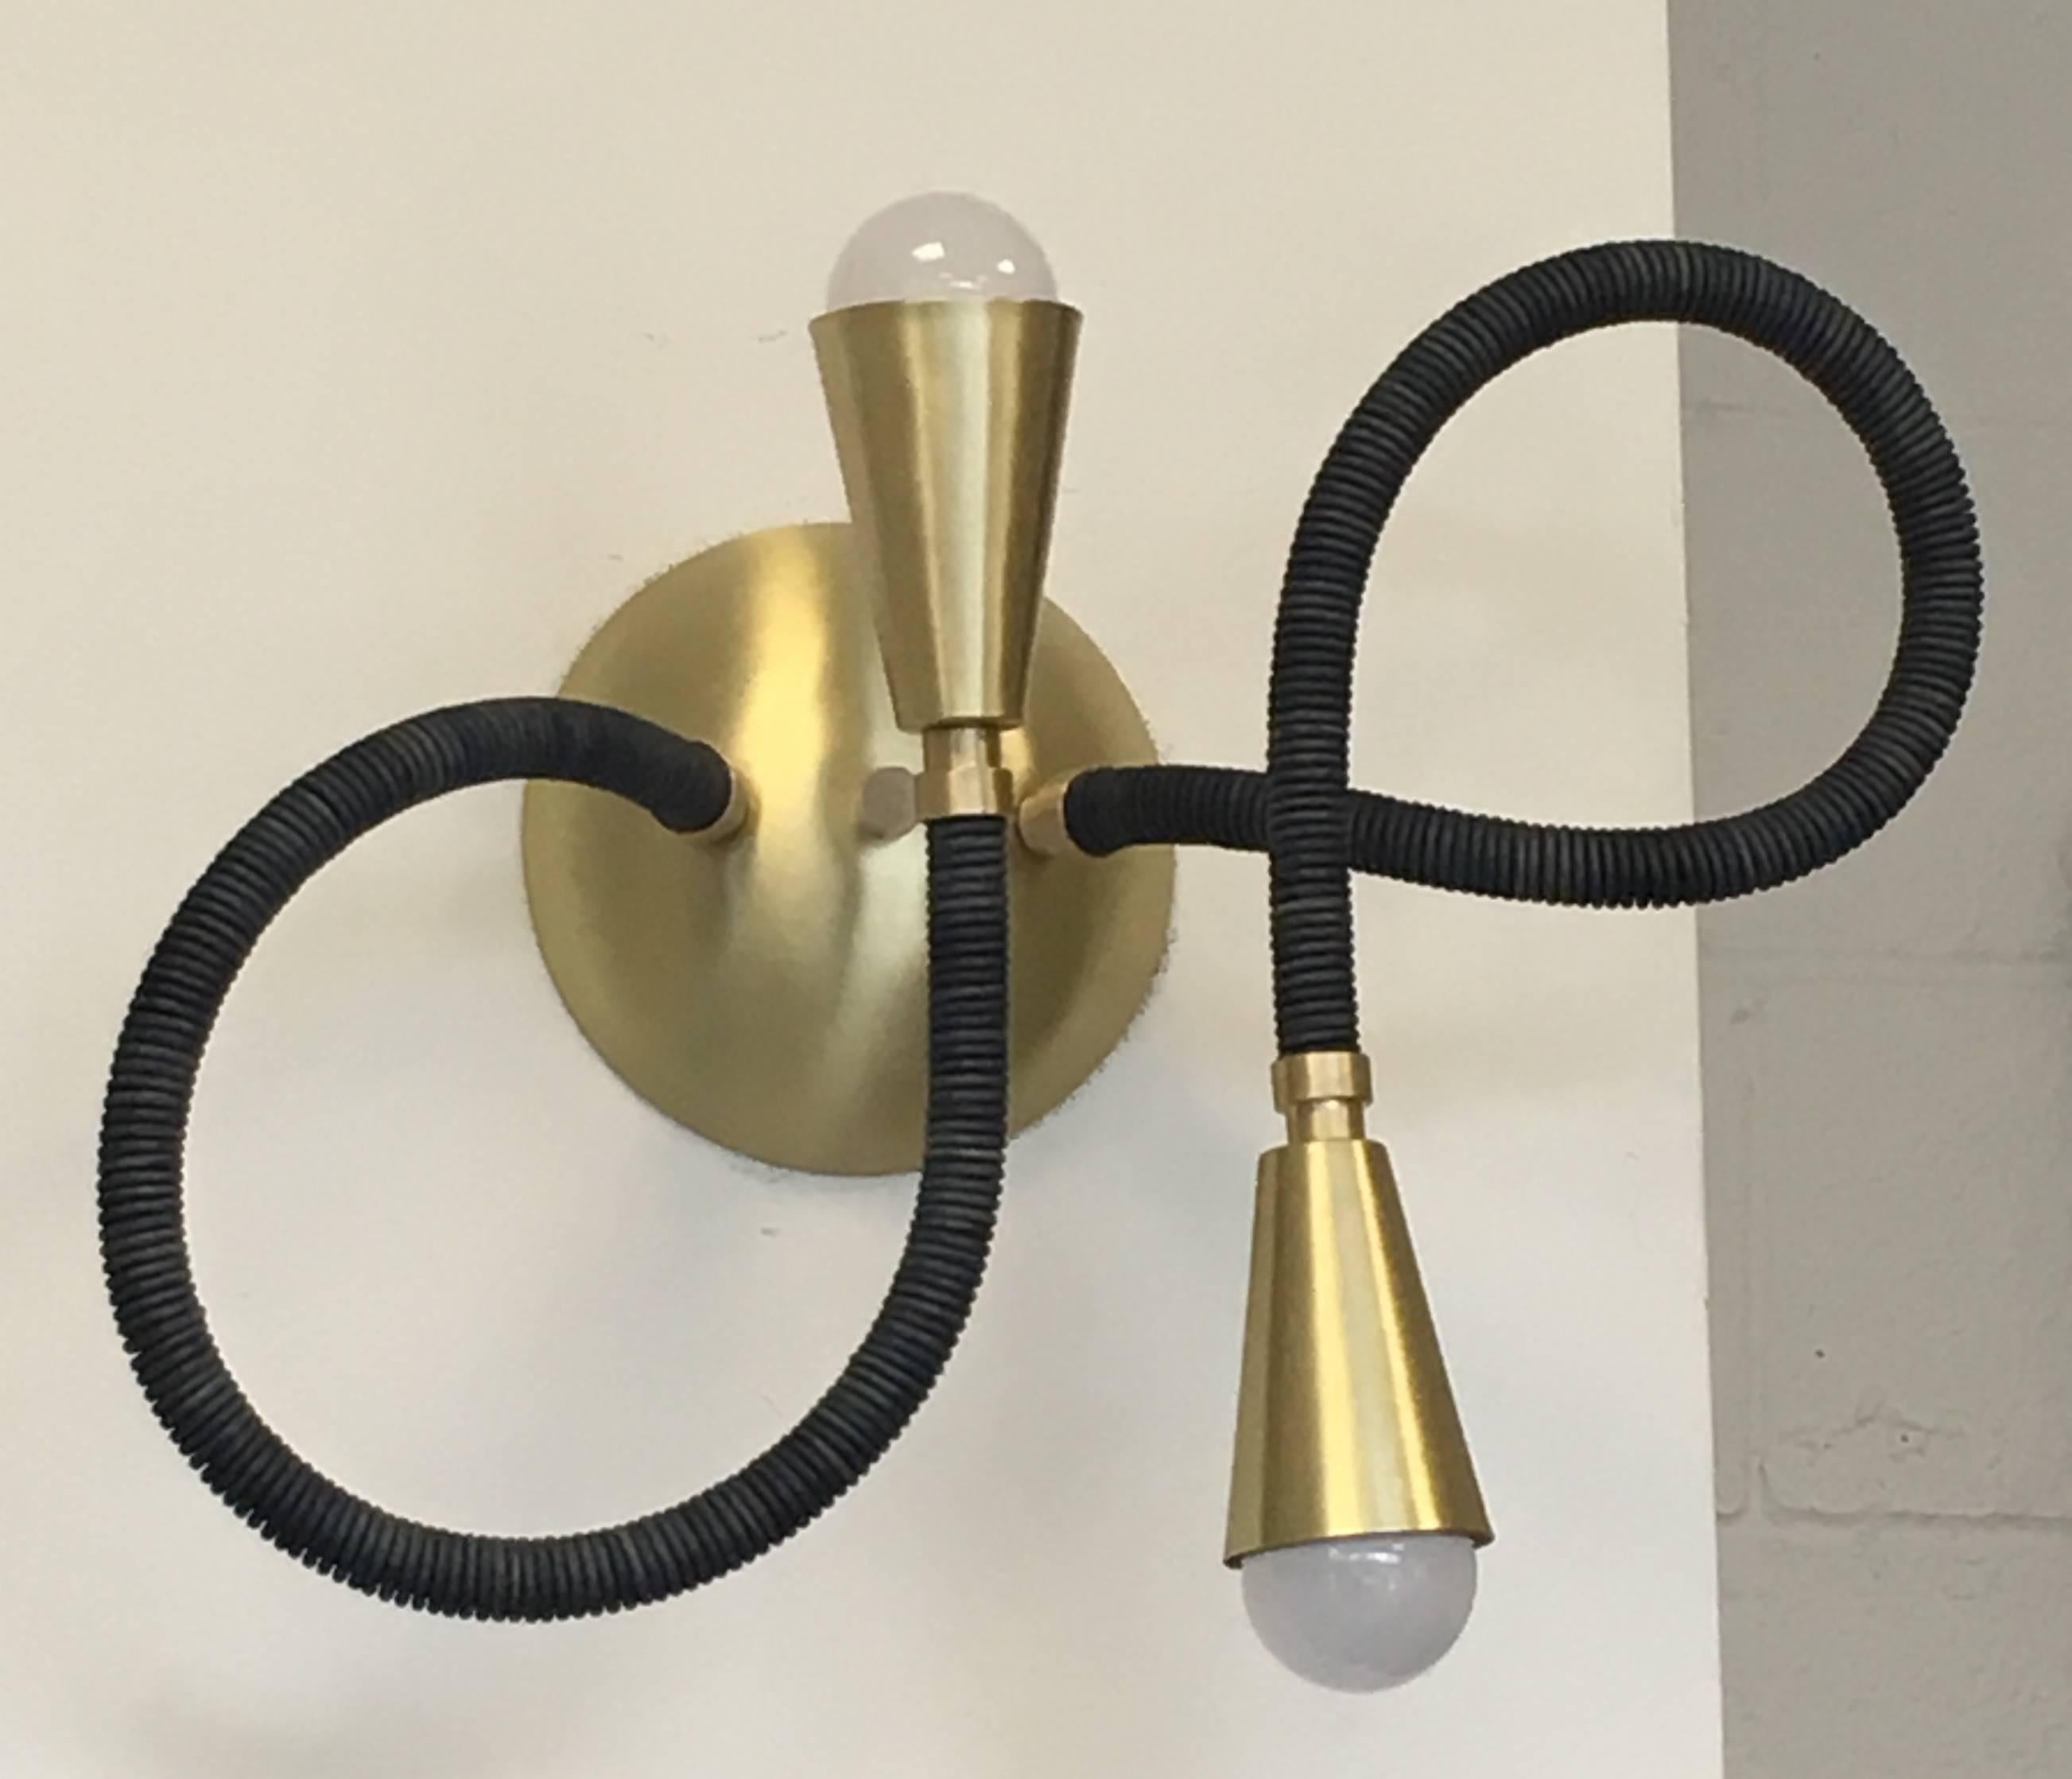 Brass and leather wrapped meander wall or ceiling mounted light fixture, shown in natural blue indigo leather and brushed brass. Adjustable arms allow for your own stylish poses. Available in custom leather colors and metal finishes, standard